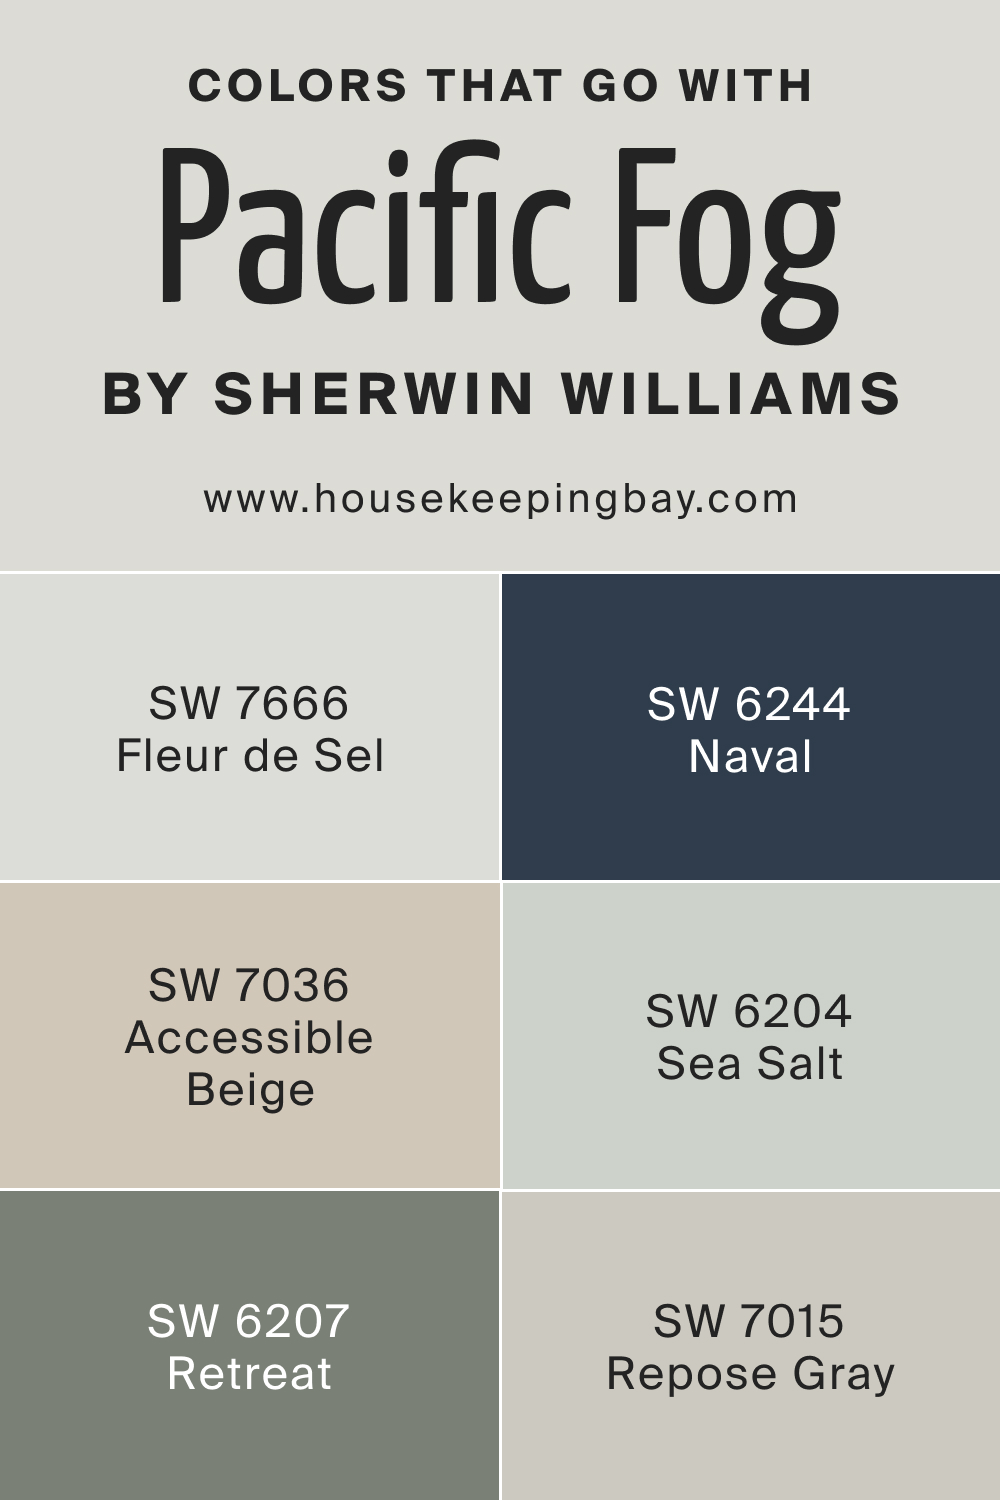 Colors that goes with SW 9627 Pacific Fog by Sherwin Williams